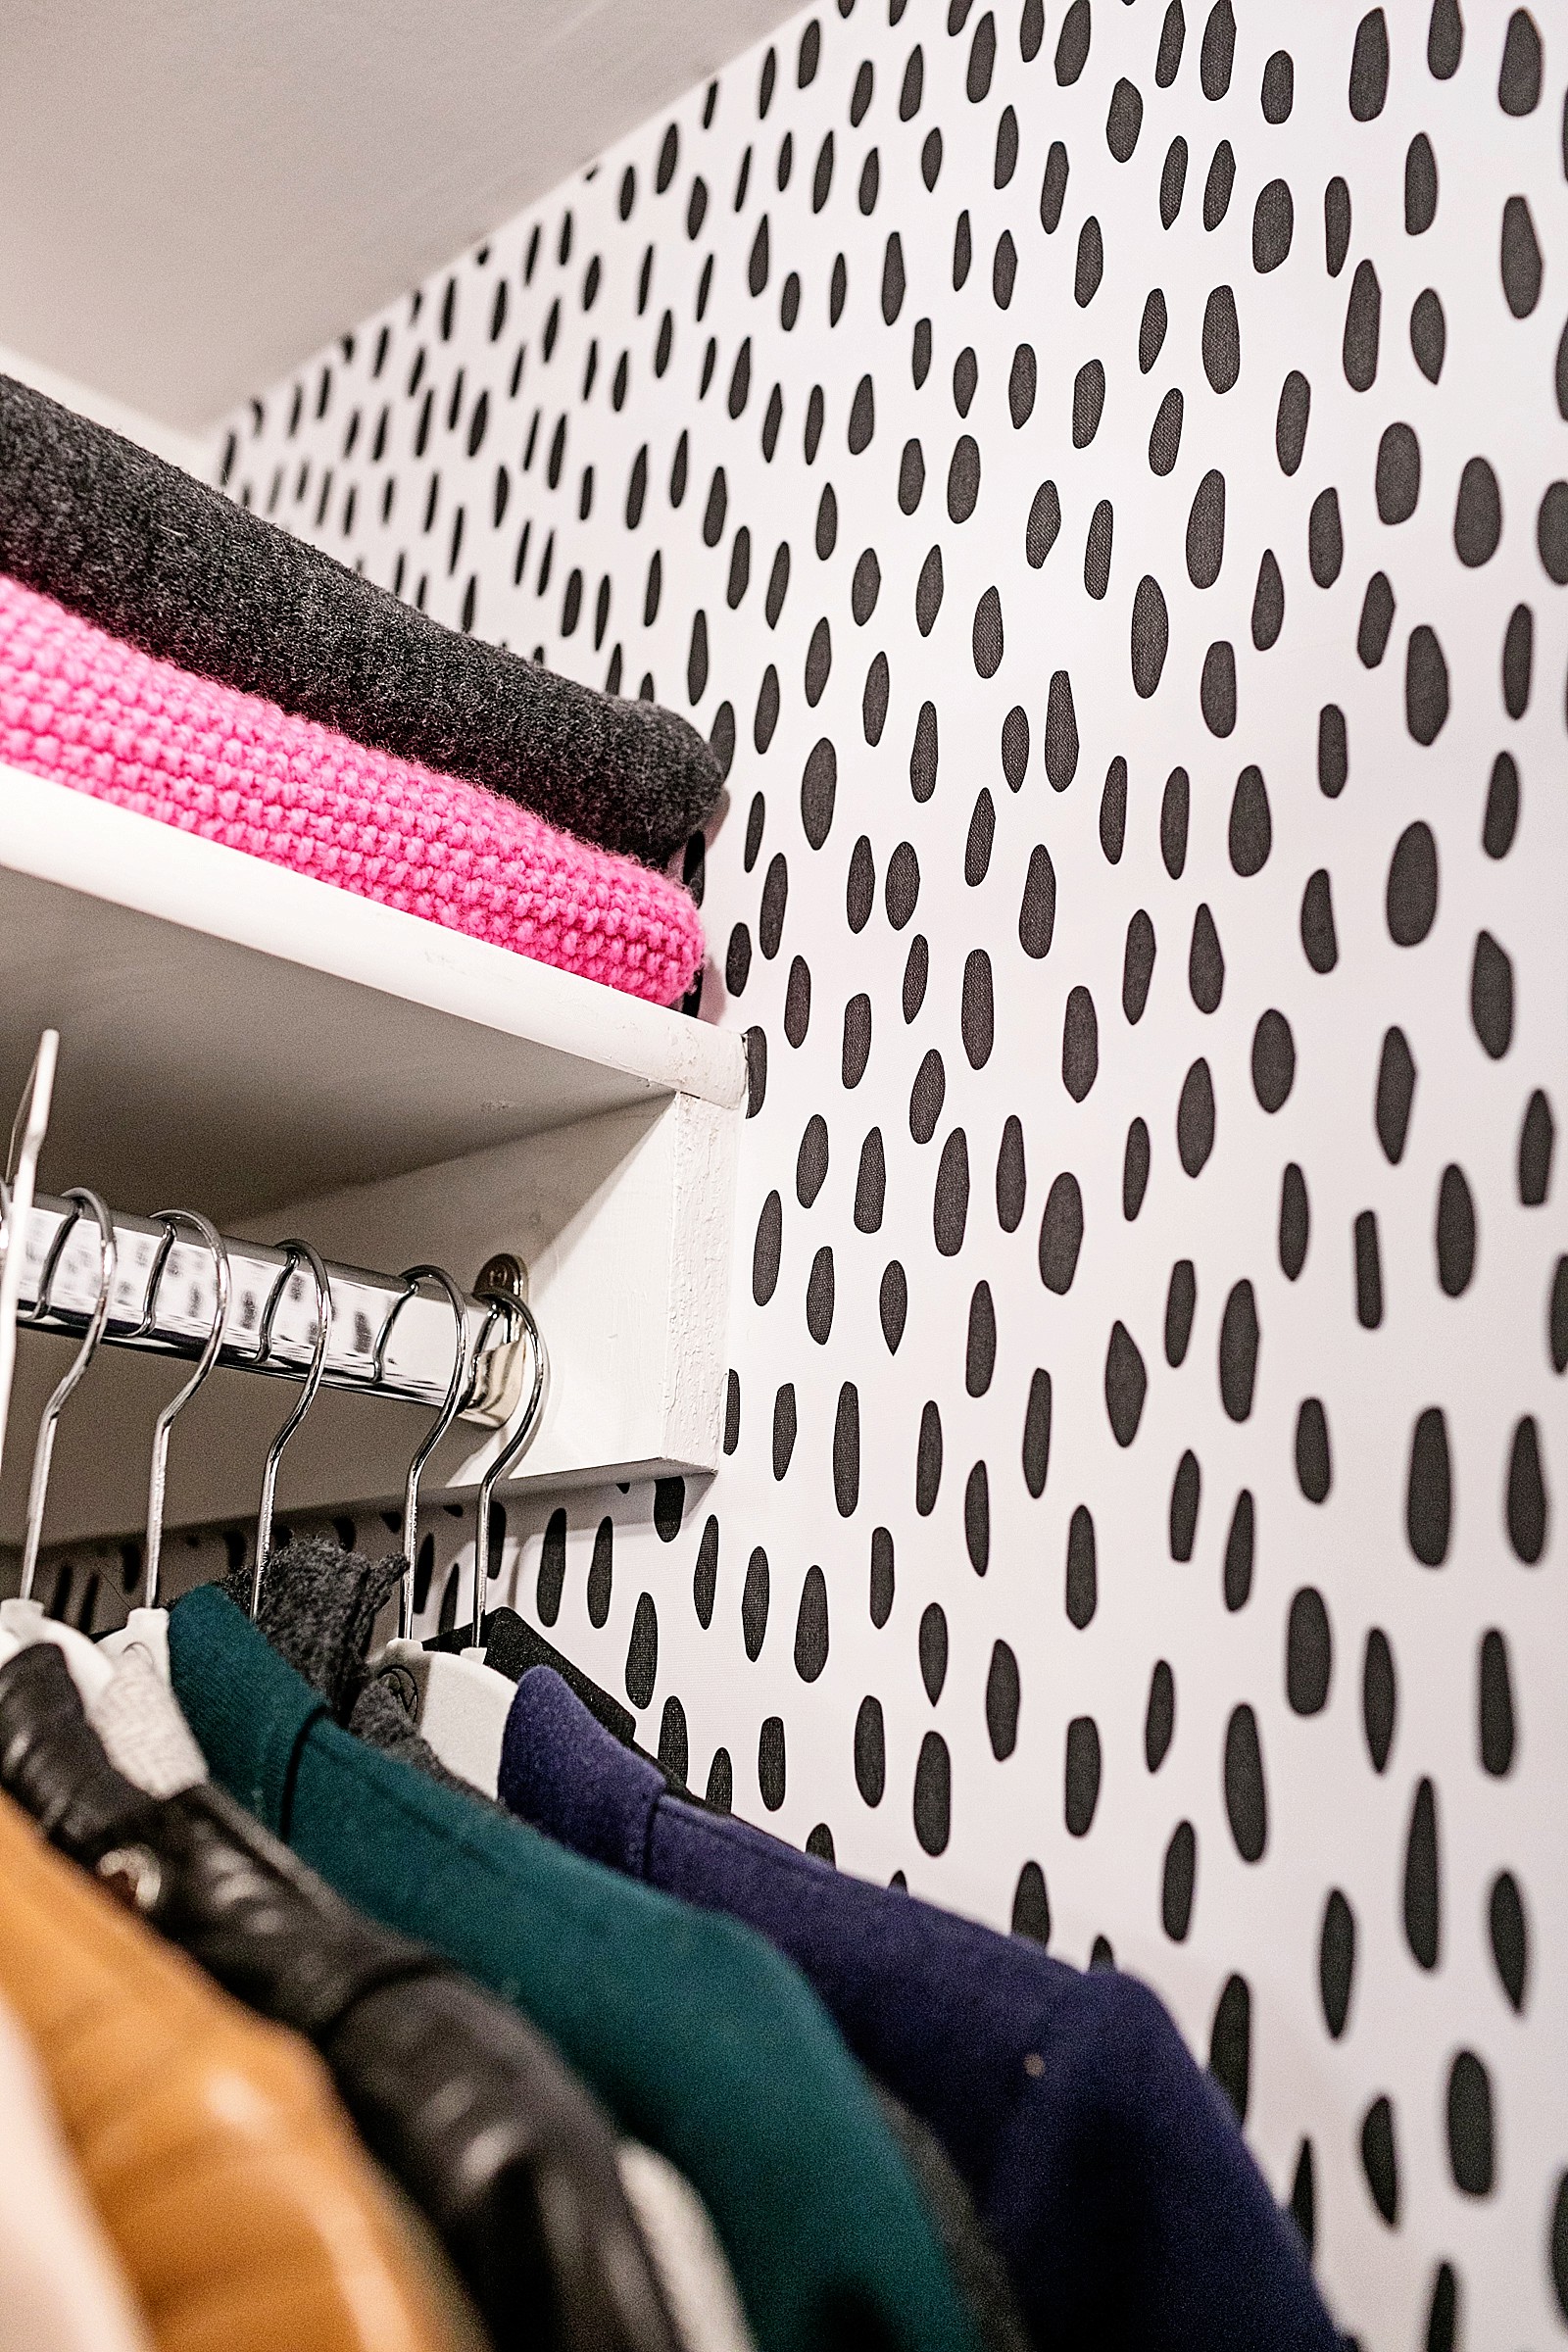 black and white spot Dalmatian look removable wallpaper in small closet